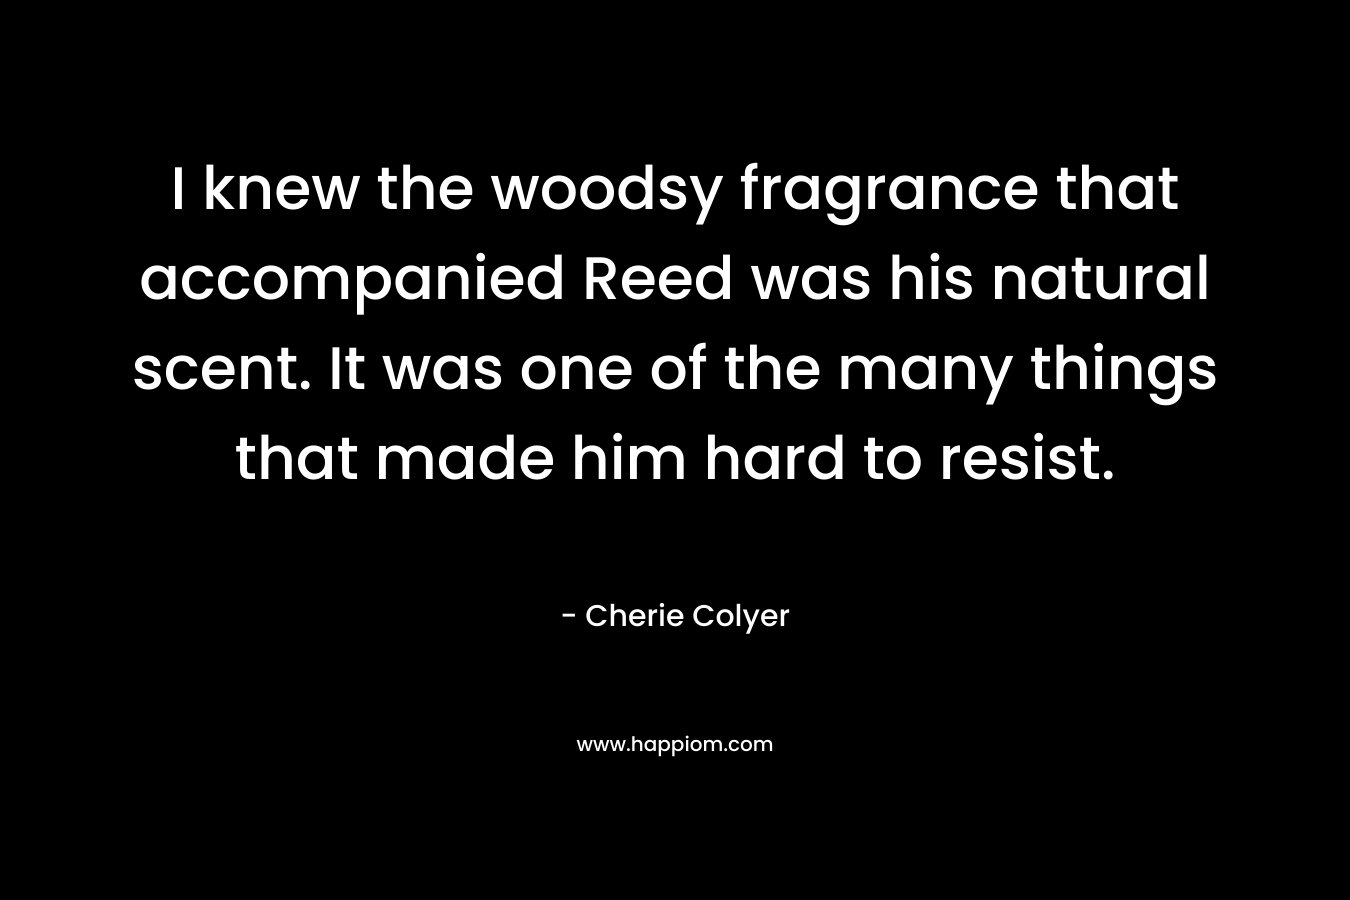 I knew the woodsy fragrance that accompanied Reed was his natural scent. It was one of the many things that made him hard to resist. – Cherie Colyer